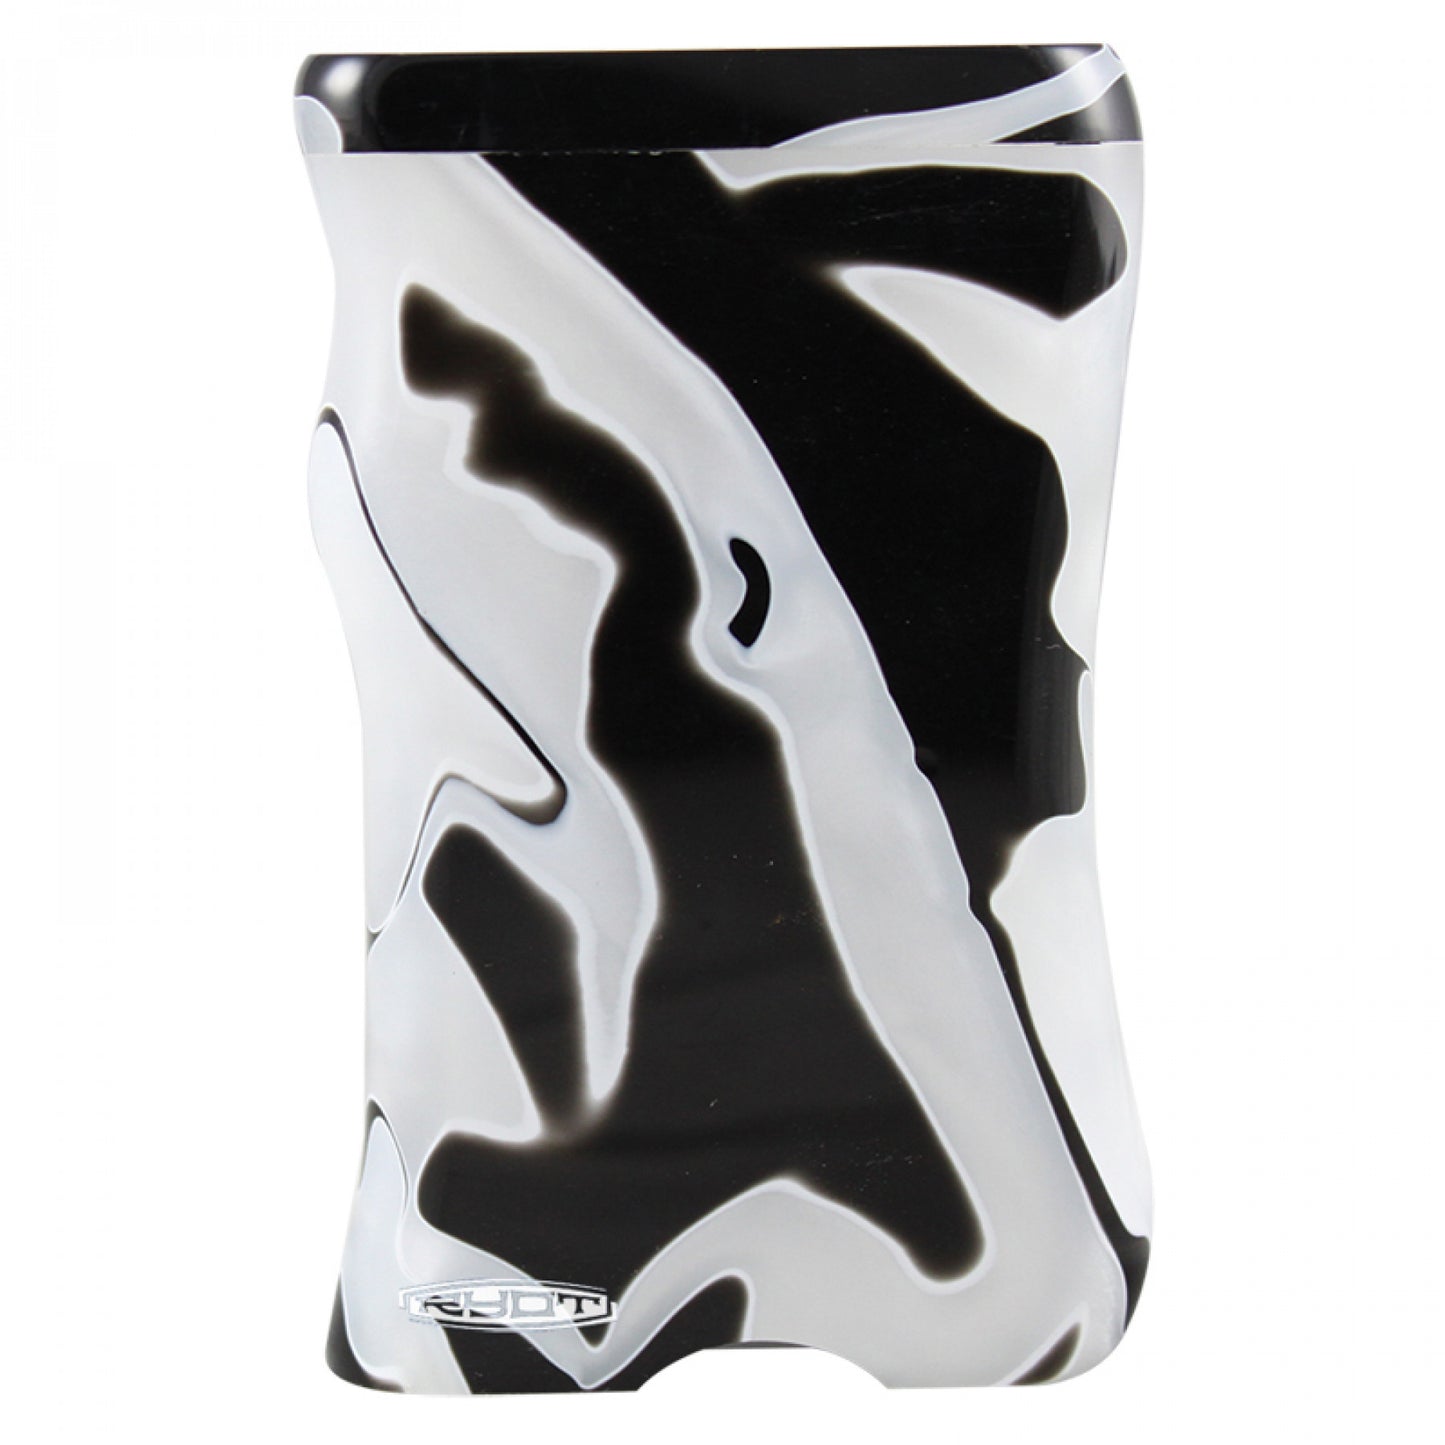 Ryot Acrylic Dugout - White and Black